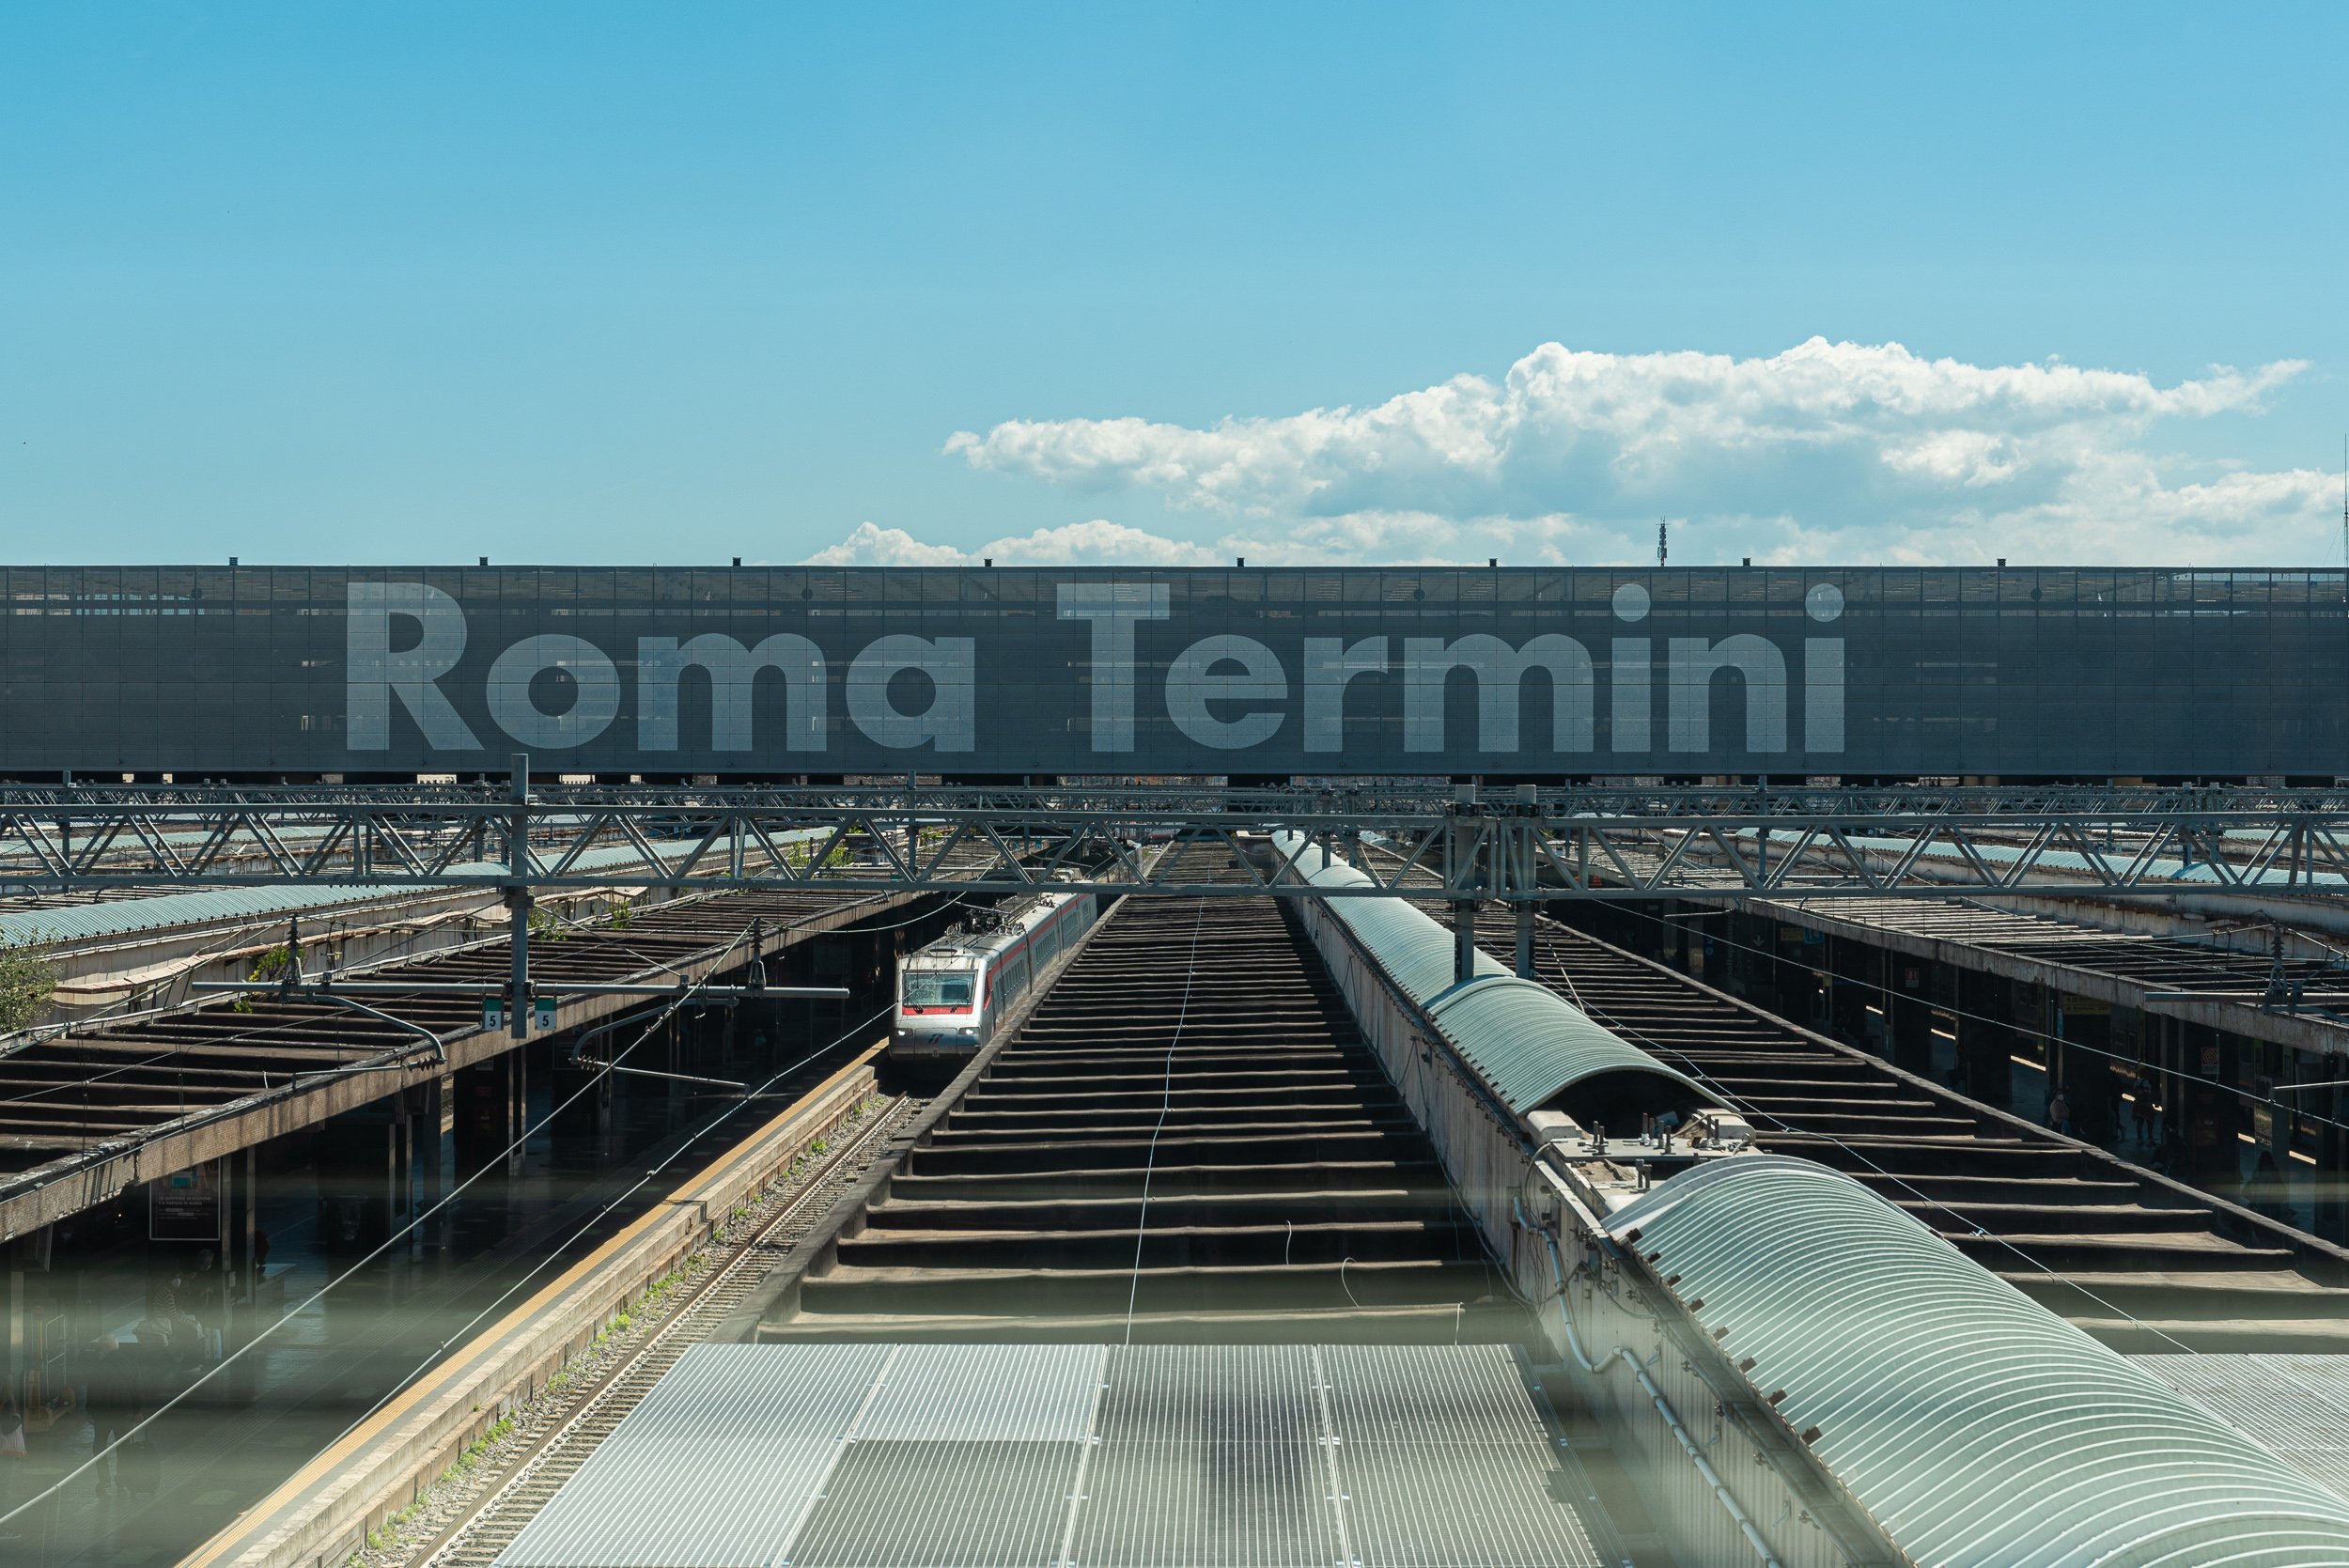 districts in rome italy - Termini Station